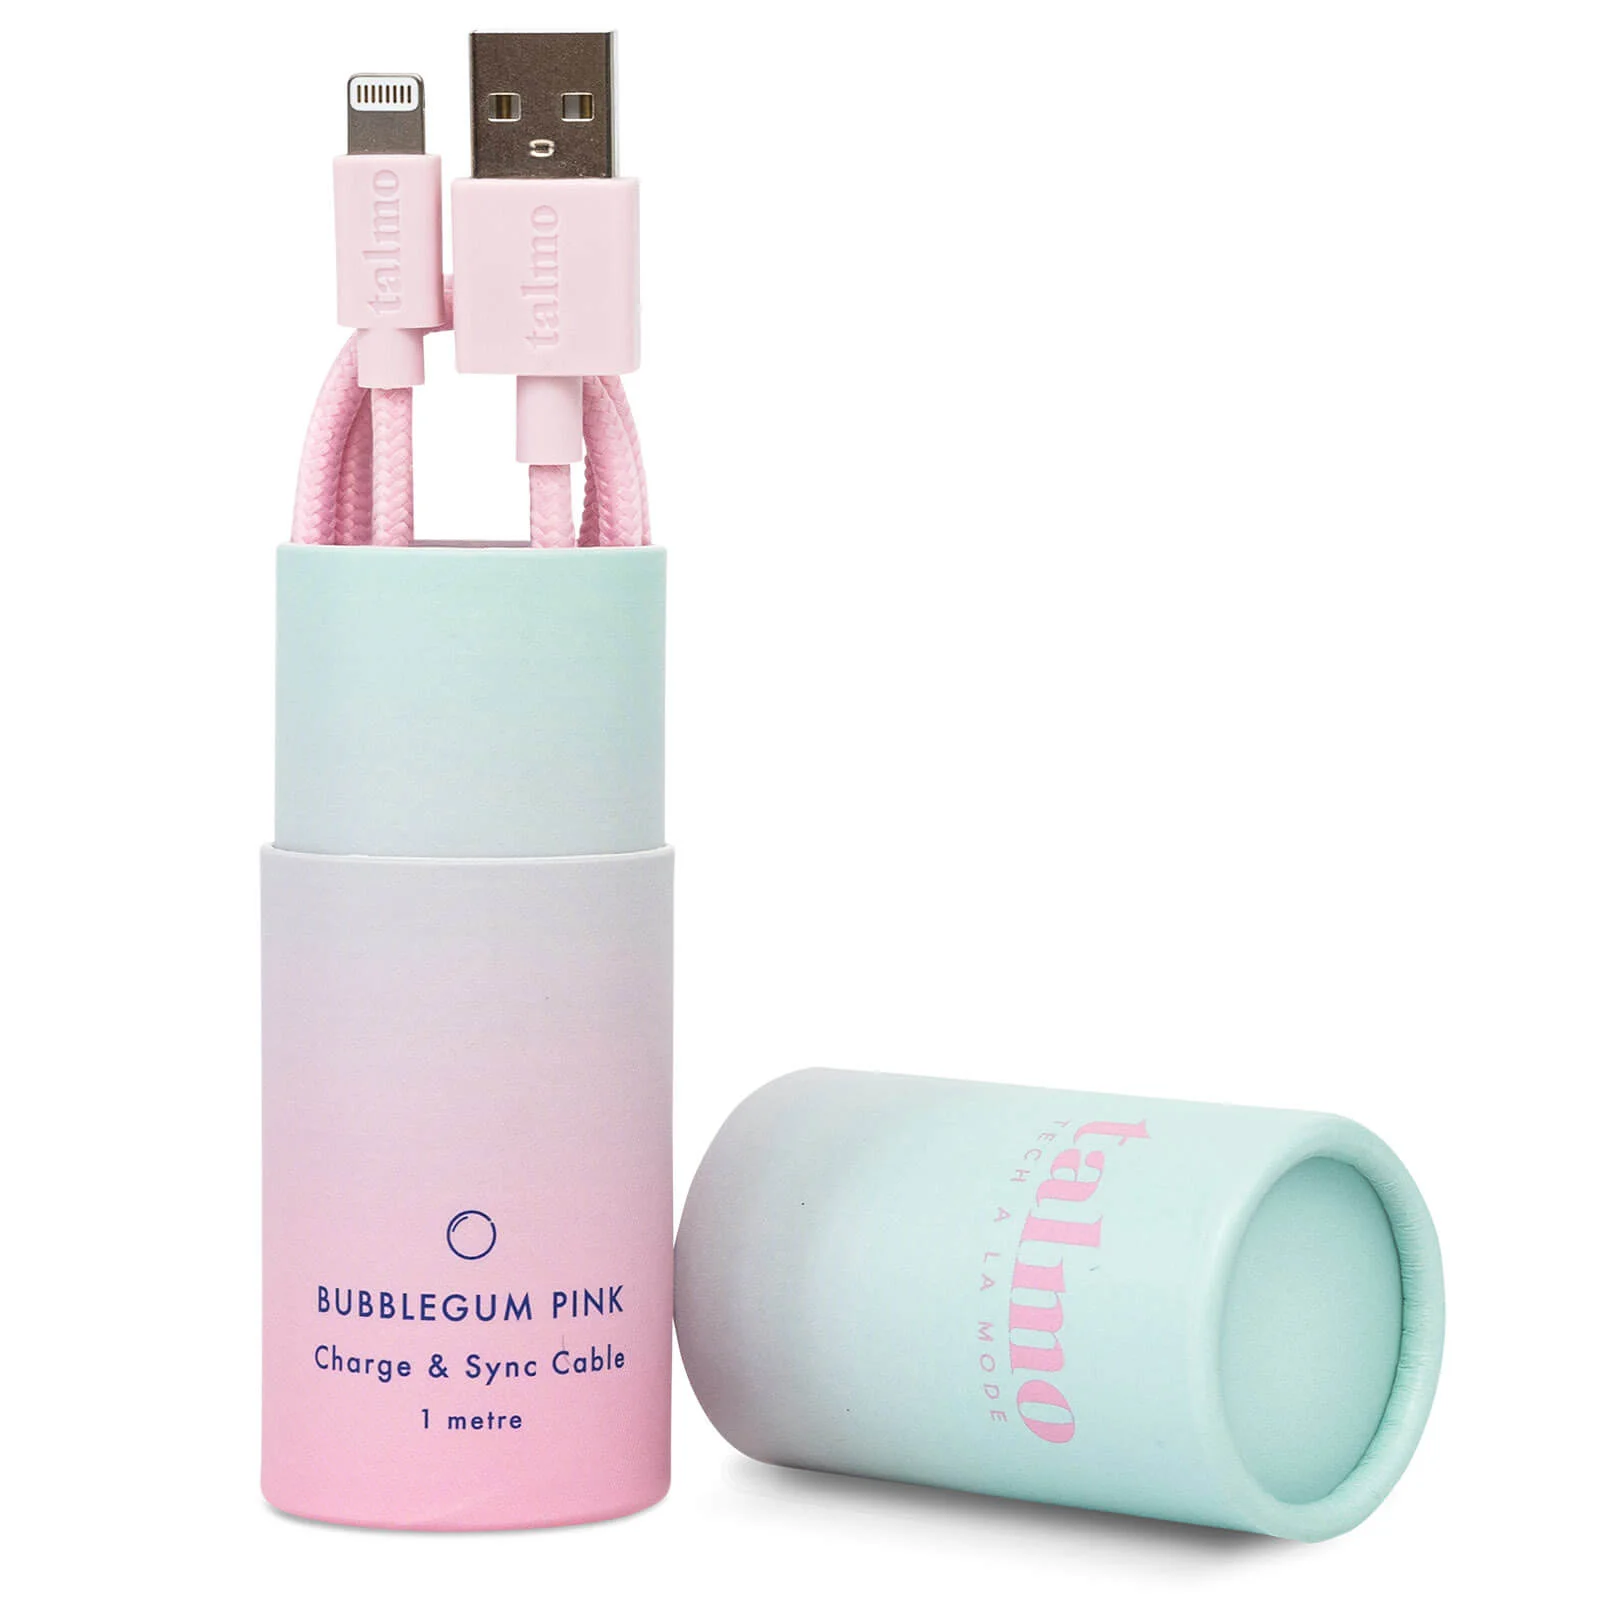 Talmo Charge and Sync Lightning Cable - Bubblegum Pink Image 1